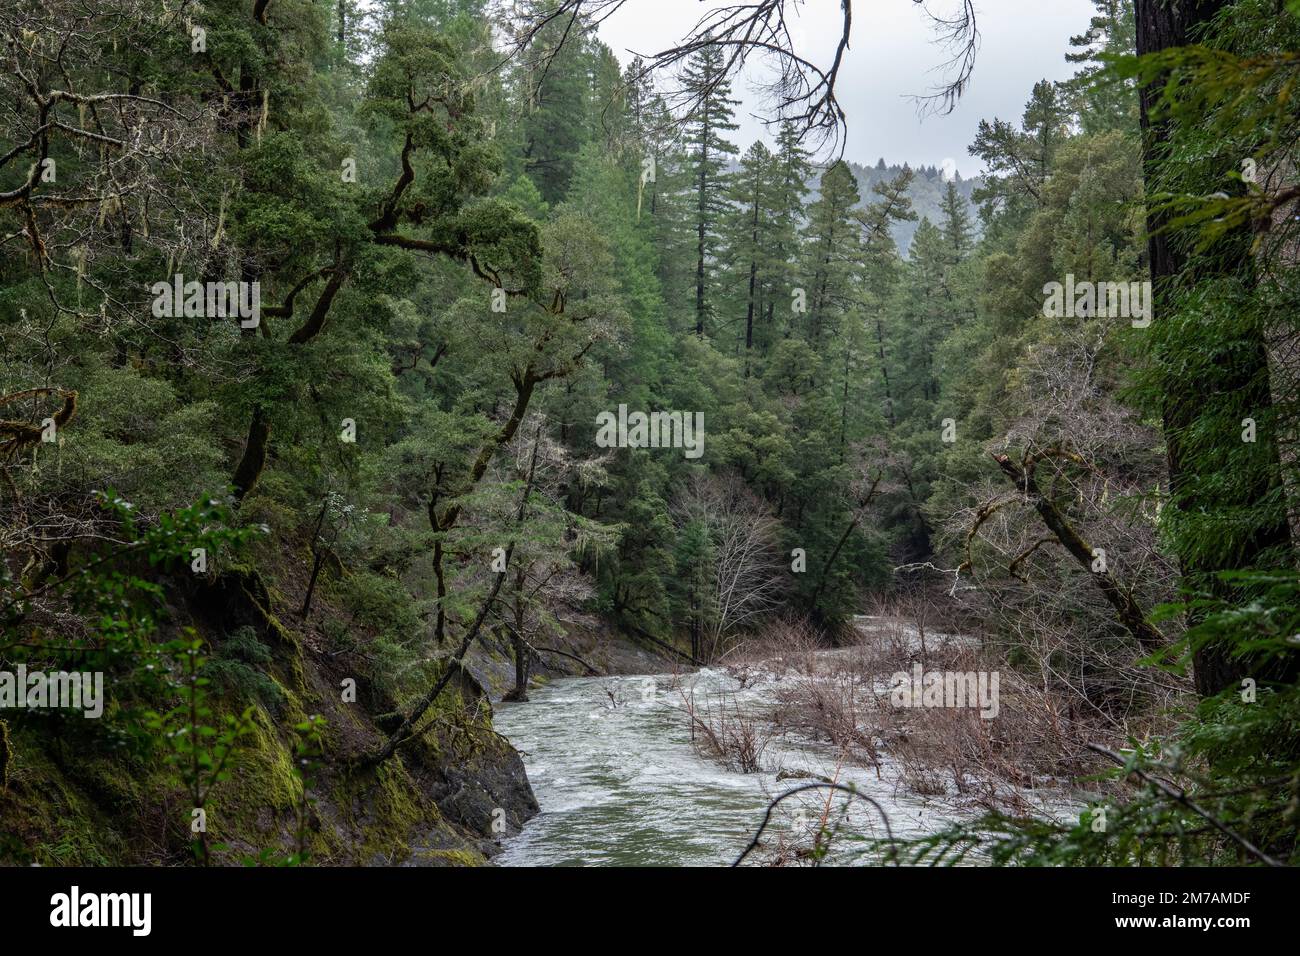 The South fork of the Eel river flows through beautiful forested hillsides in the North California wilderness in Mendocino county, USA. Stock Photo